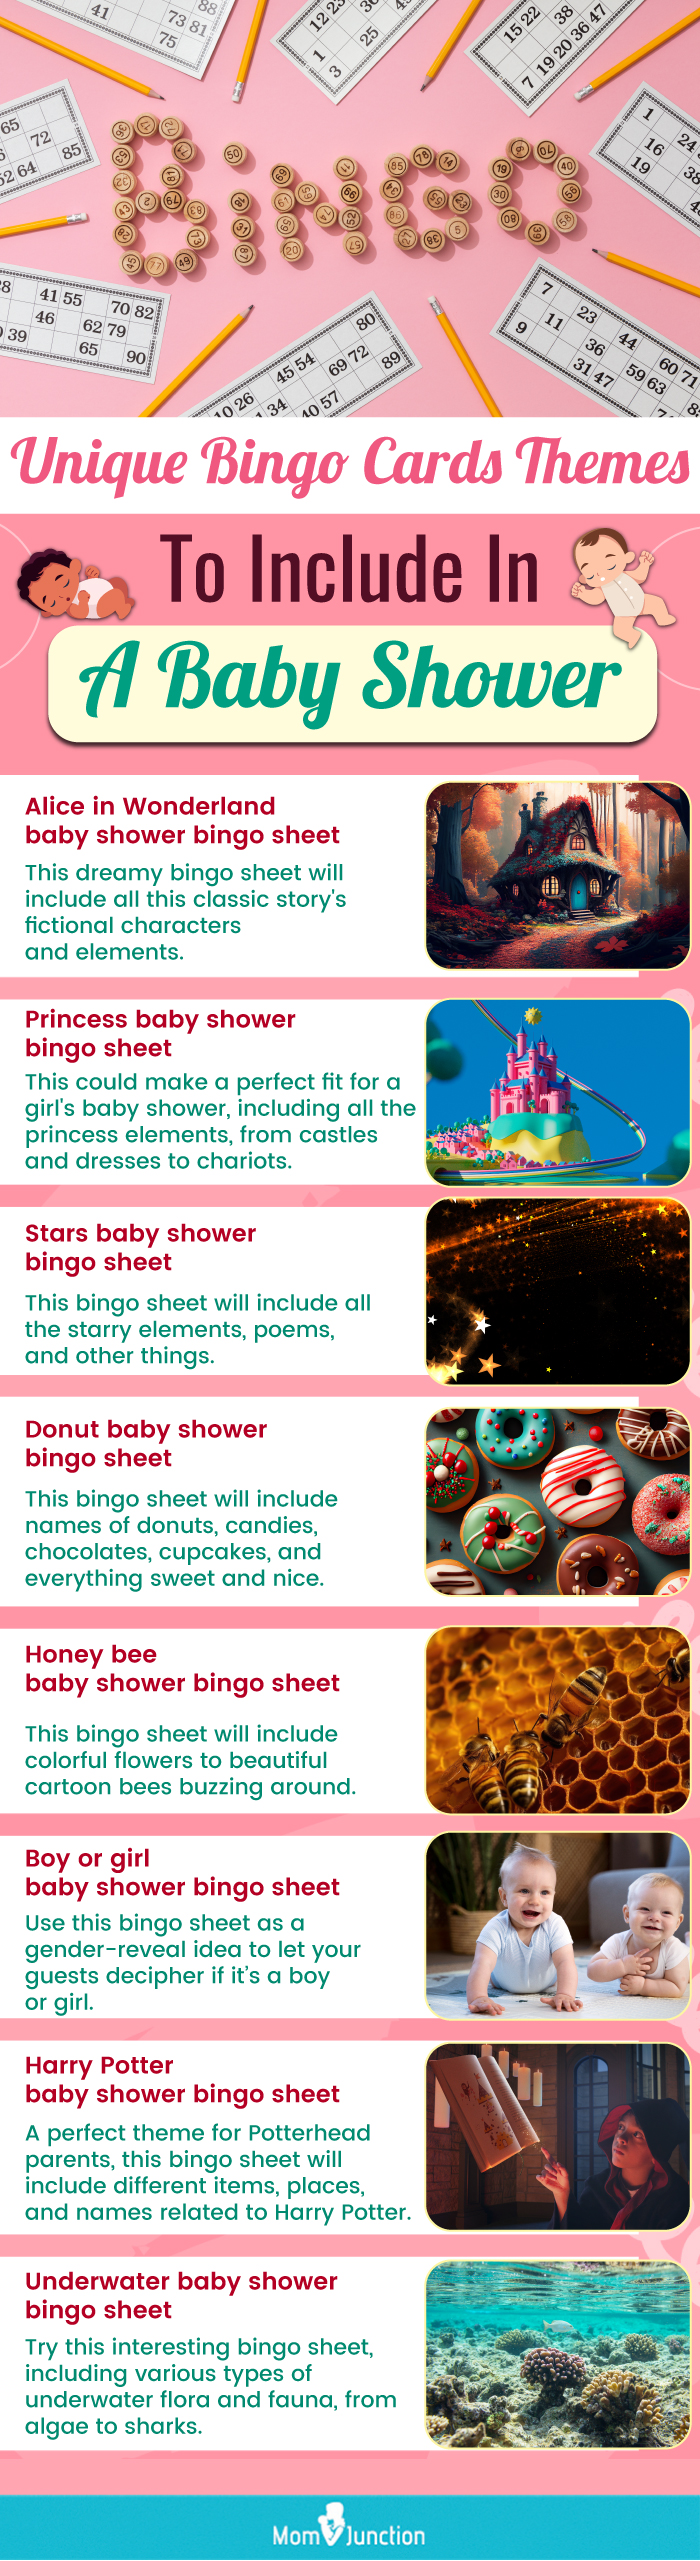 unique bingo cards themes to include in a baby shower (infographic)